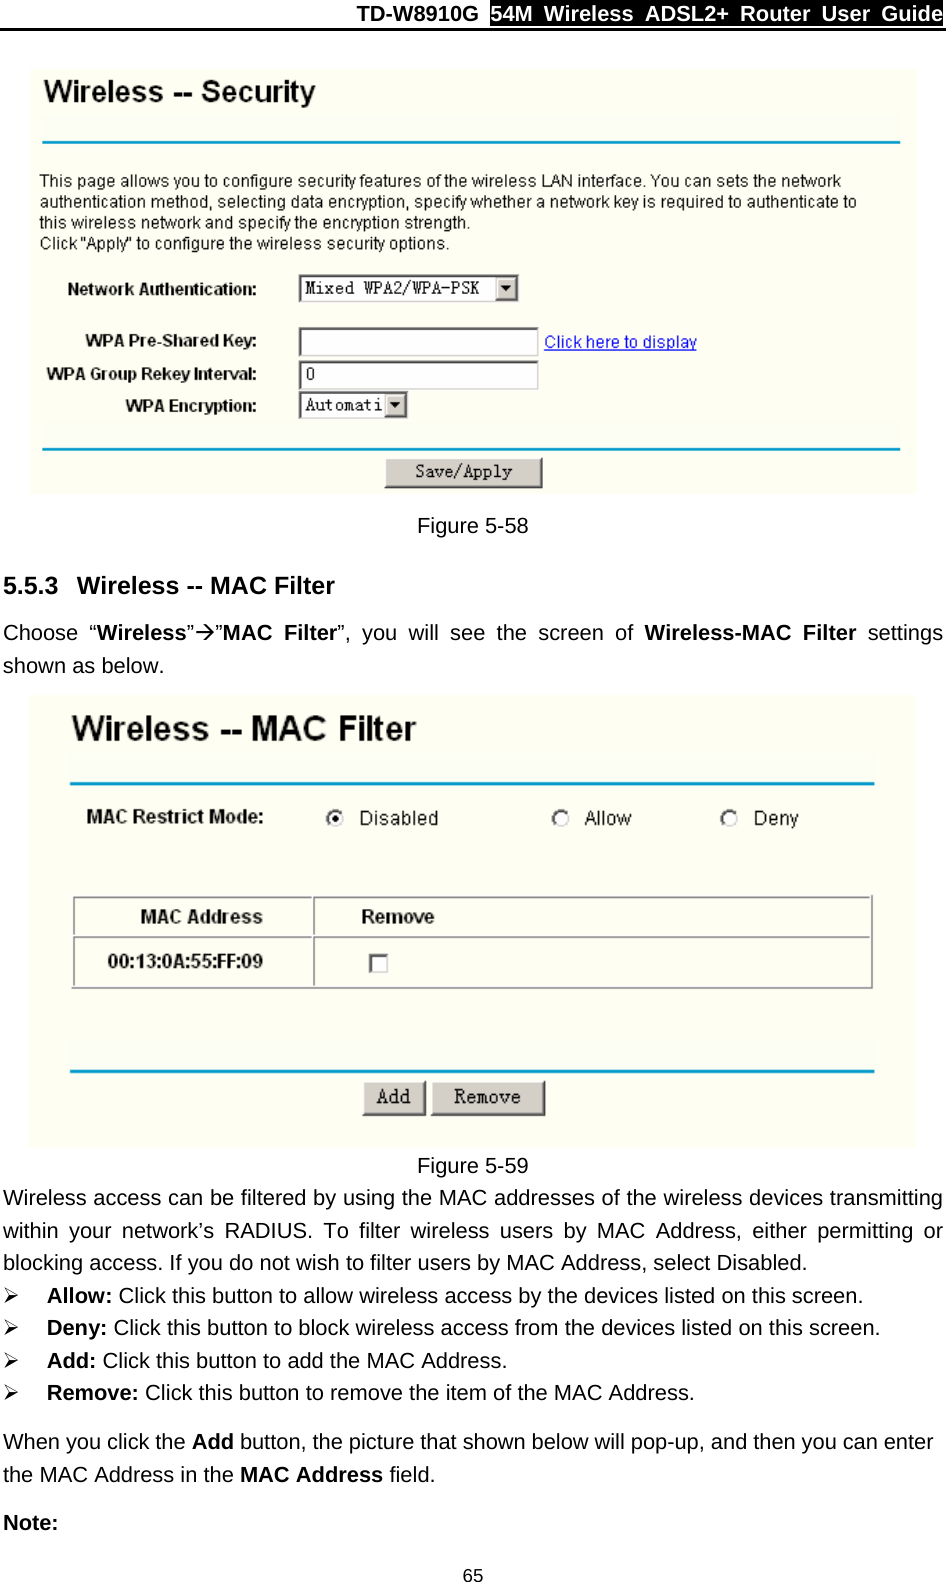 TD-W8910G  54M Wireless ADSL2+ Router User Guide  65 Figure 5-58 5.5.3  Wireless -- MAC Filter Choose “Wireless”Æ”MAC Filter”, you will see the screen of Wireless-MAC Filter settings shown as below.  Figure 5-59 Wireless access can be filtered by using the MAC addresses of the wireless devices transmitting within your network’s RADIUS. To filter wireless users by MAC Address, either permitting or blocking access. If you do not wish to filter users by MAC Address, select Disabled. ¾ Allow: Click this button to allow wireless access by the devices listed on this screen. ¾ Deny: Click this button to block wireless access from the devices listed on this screen. ¾ Add: Click this button to add the MAC Address. ¾ Remove: Click this button to remove the item of the MAC Address. When you click the Add button, the picture that shown below will pop-up, and then you can enter the MAC Address in the MAC Address field. Note: 